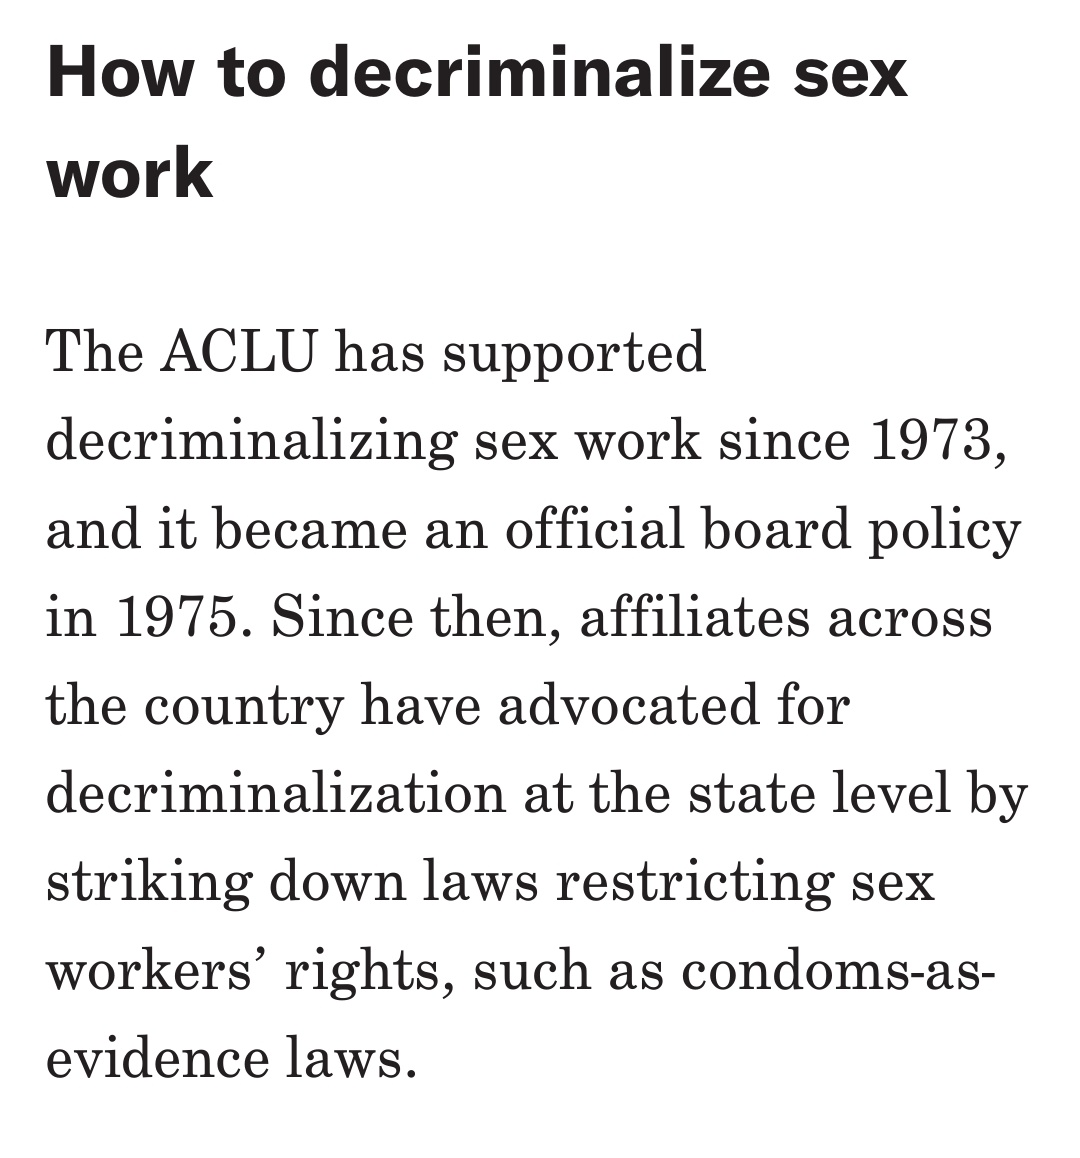 Lala Zannell, who works for ACLU, also advocates legalizing the sex industry, promoting the oft-repeated myths that decriminalizing paid rape and the right for men to access and profit from (overwhelmingly) women's bodies would protect them.